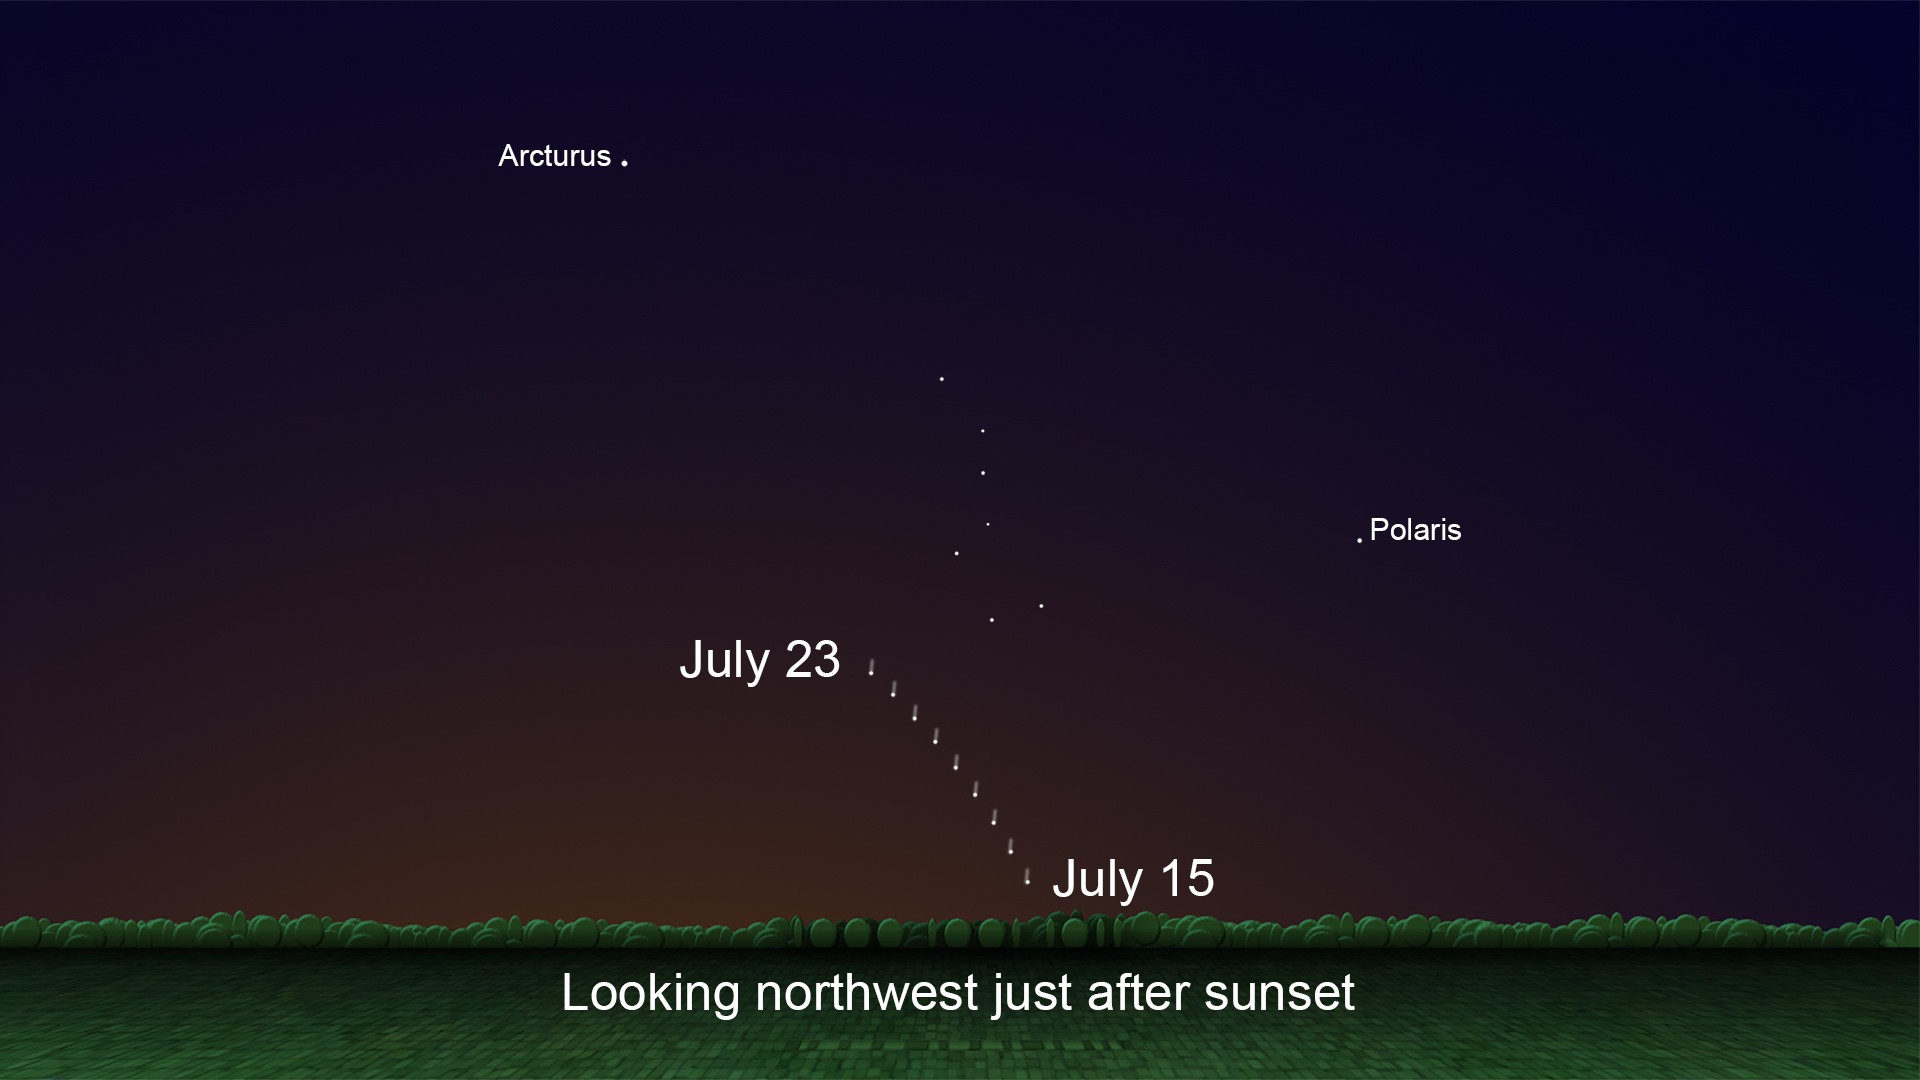 Skychart showing the location of Comet C/2020 F3 just after sunset, July 15 through 23 Credit: NASA/JPL-Caltech